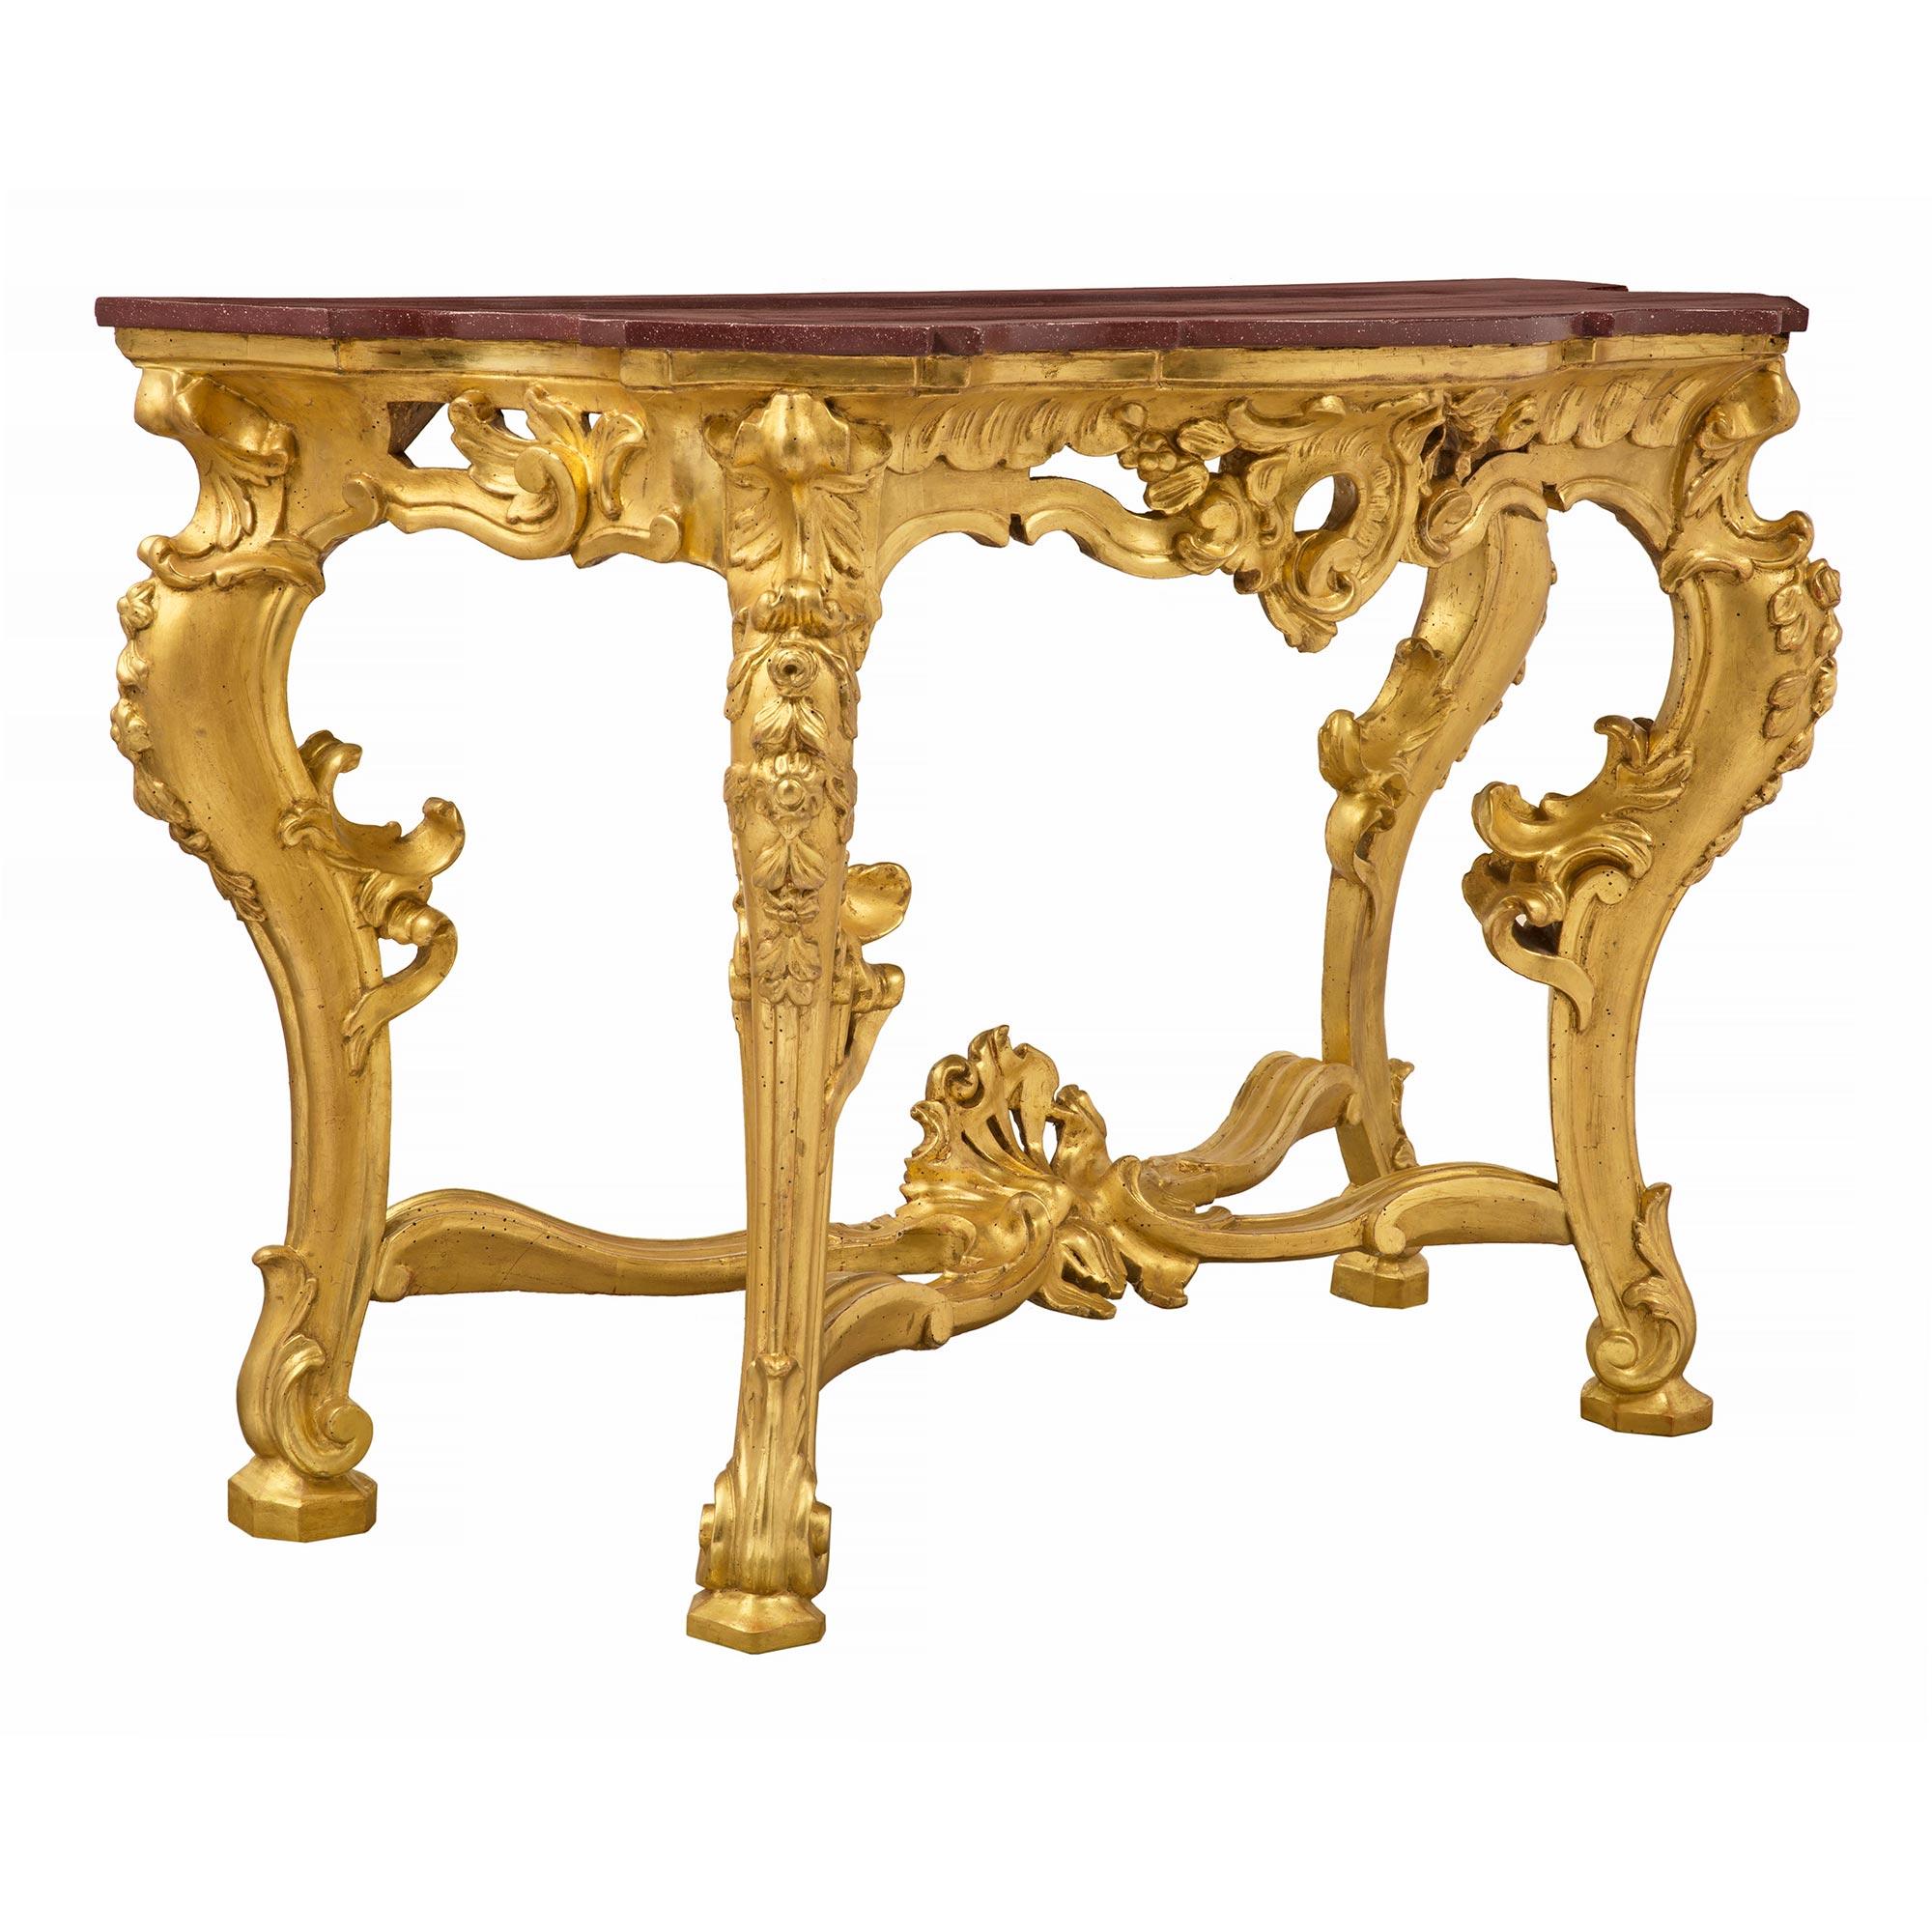  Italian 19th Century Baroque Giltwood and Faux Painted Porphyry Console In Good Condition For Sale In West Palm Beach, FL